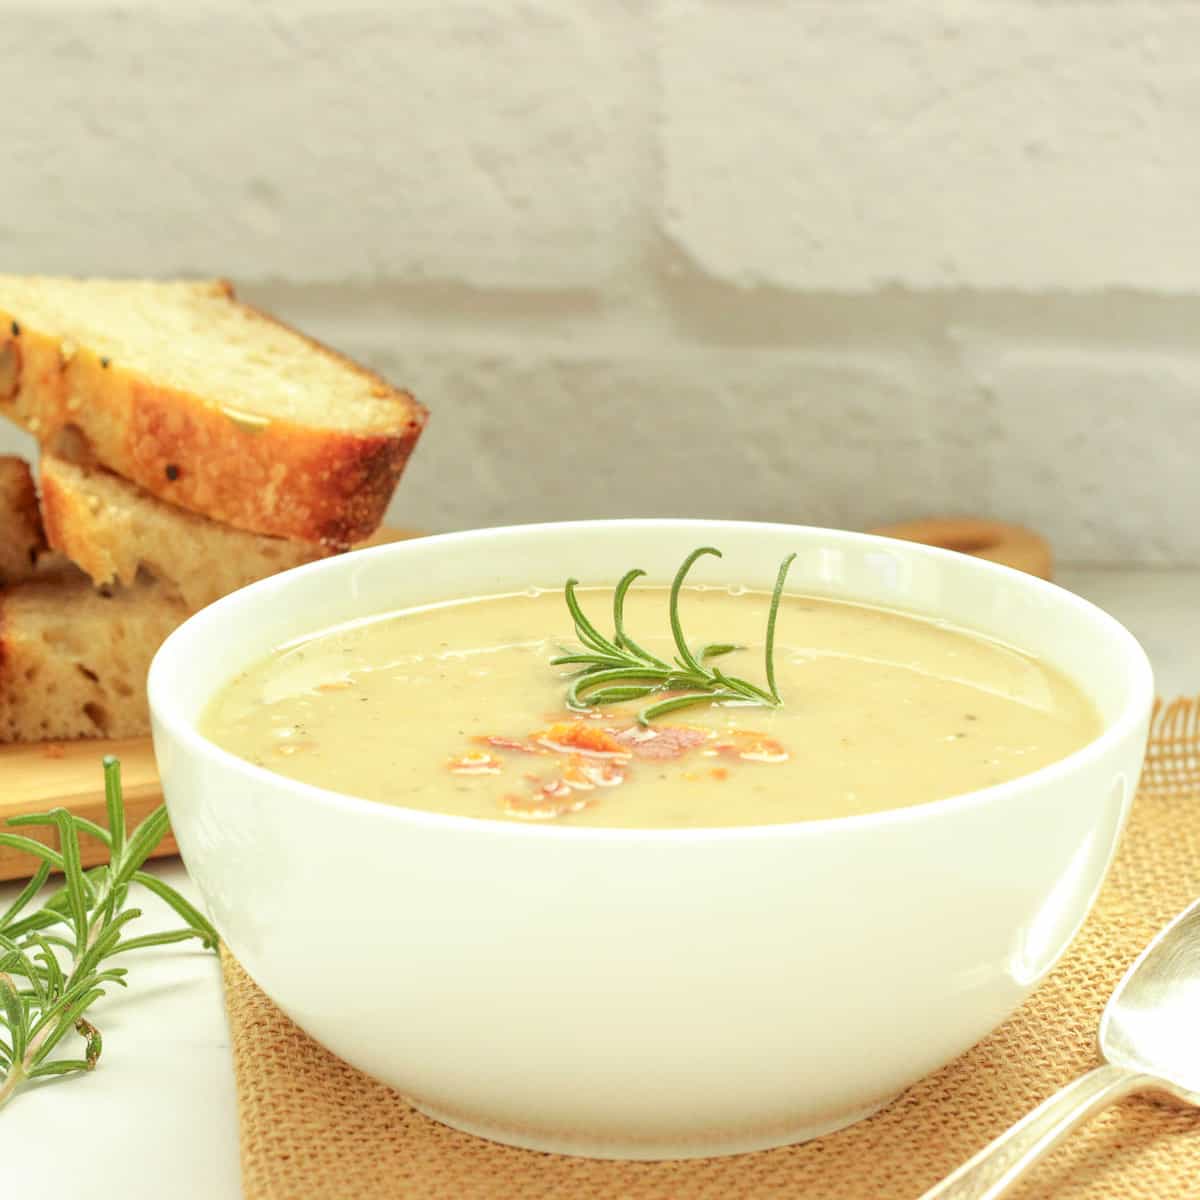 Creamy Fennel and White Bean Soup